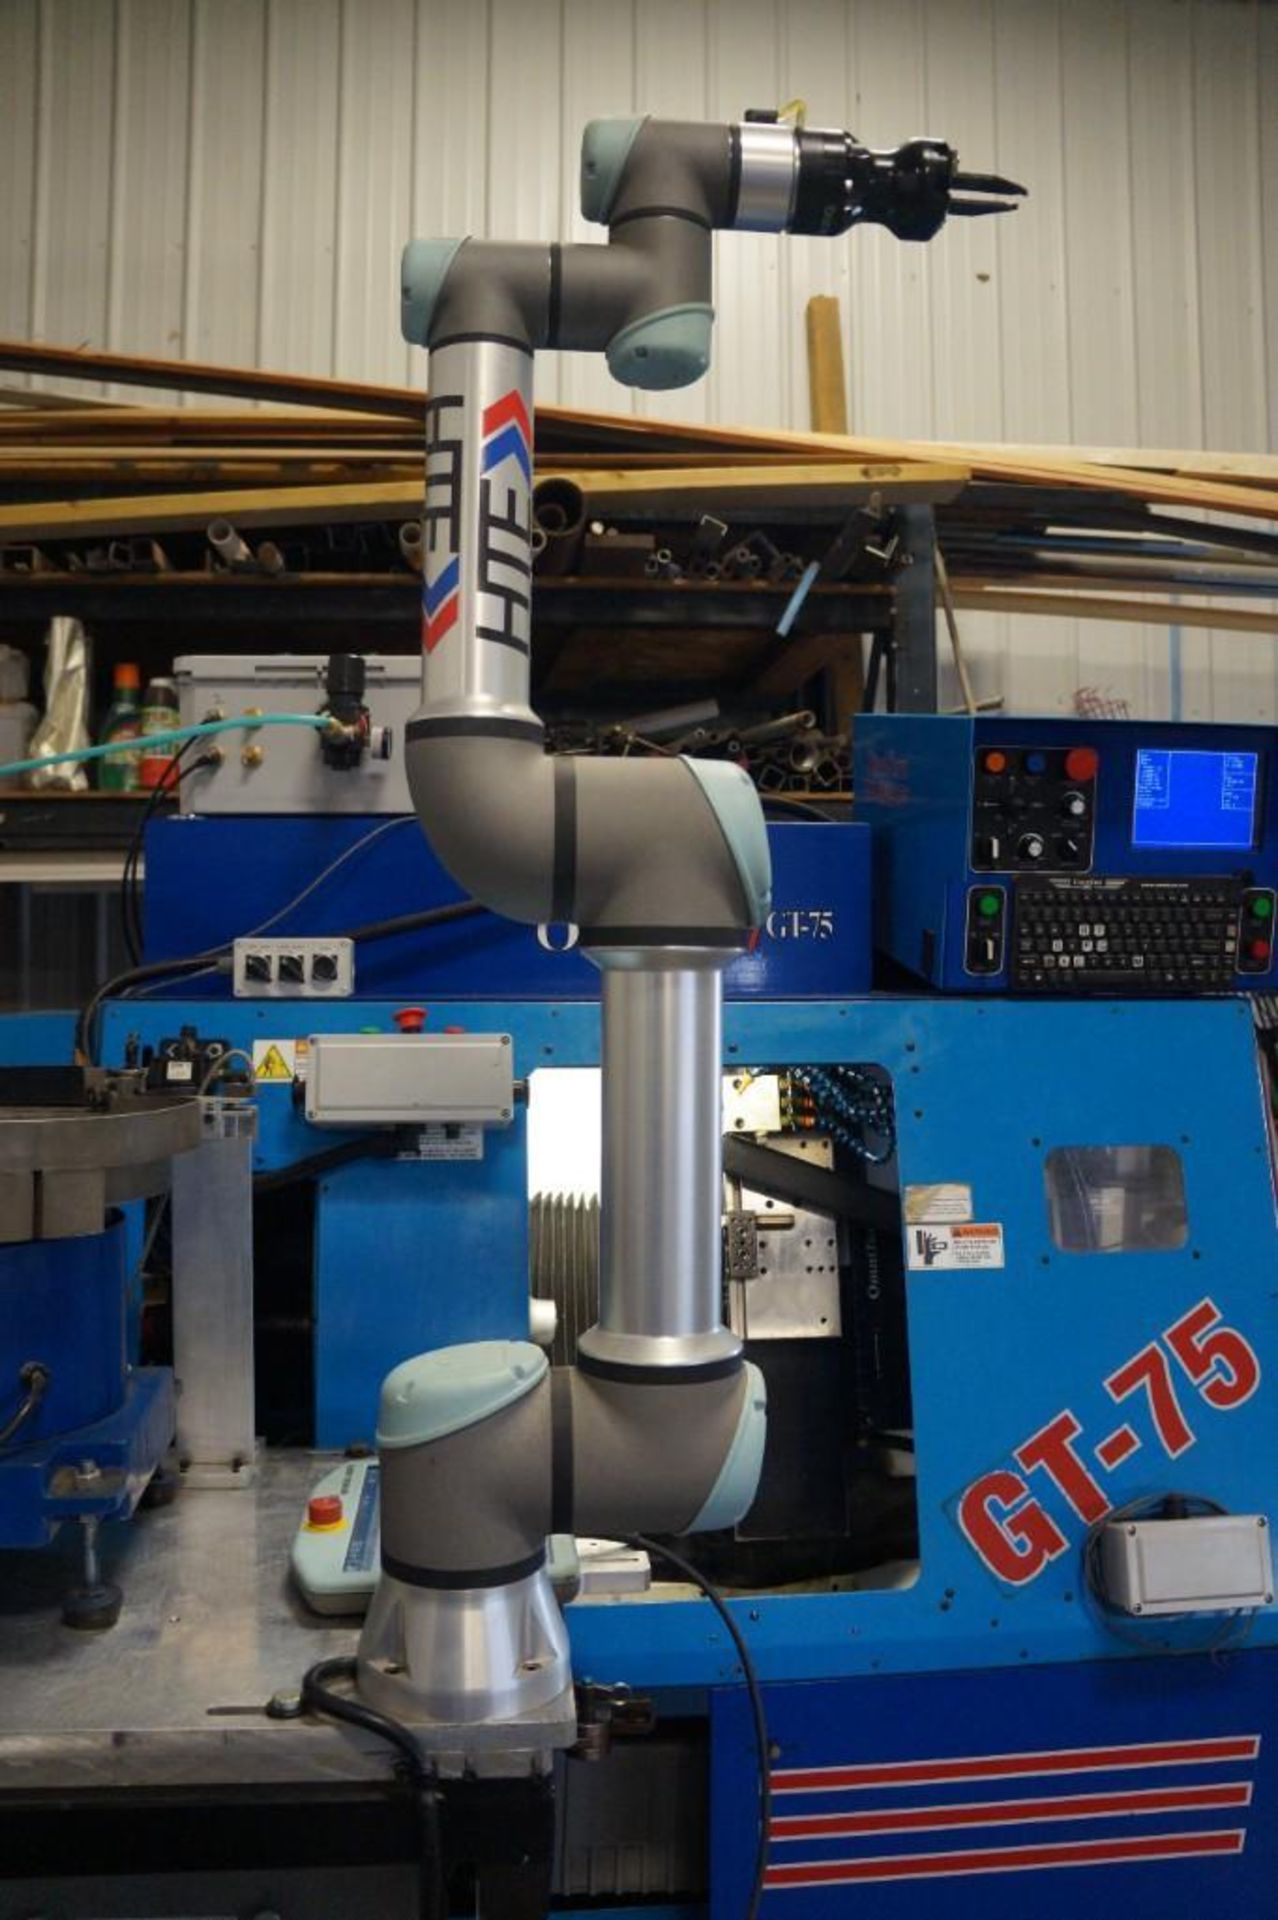 AUTOMATED OMNITURN GT-75 GANG-TOOL CNC TURNING CENTER, 2016 CNC LATHE WITH 2018 UNIVERSAL ROBOT UR5E - Image 12 of 47